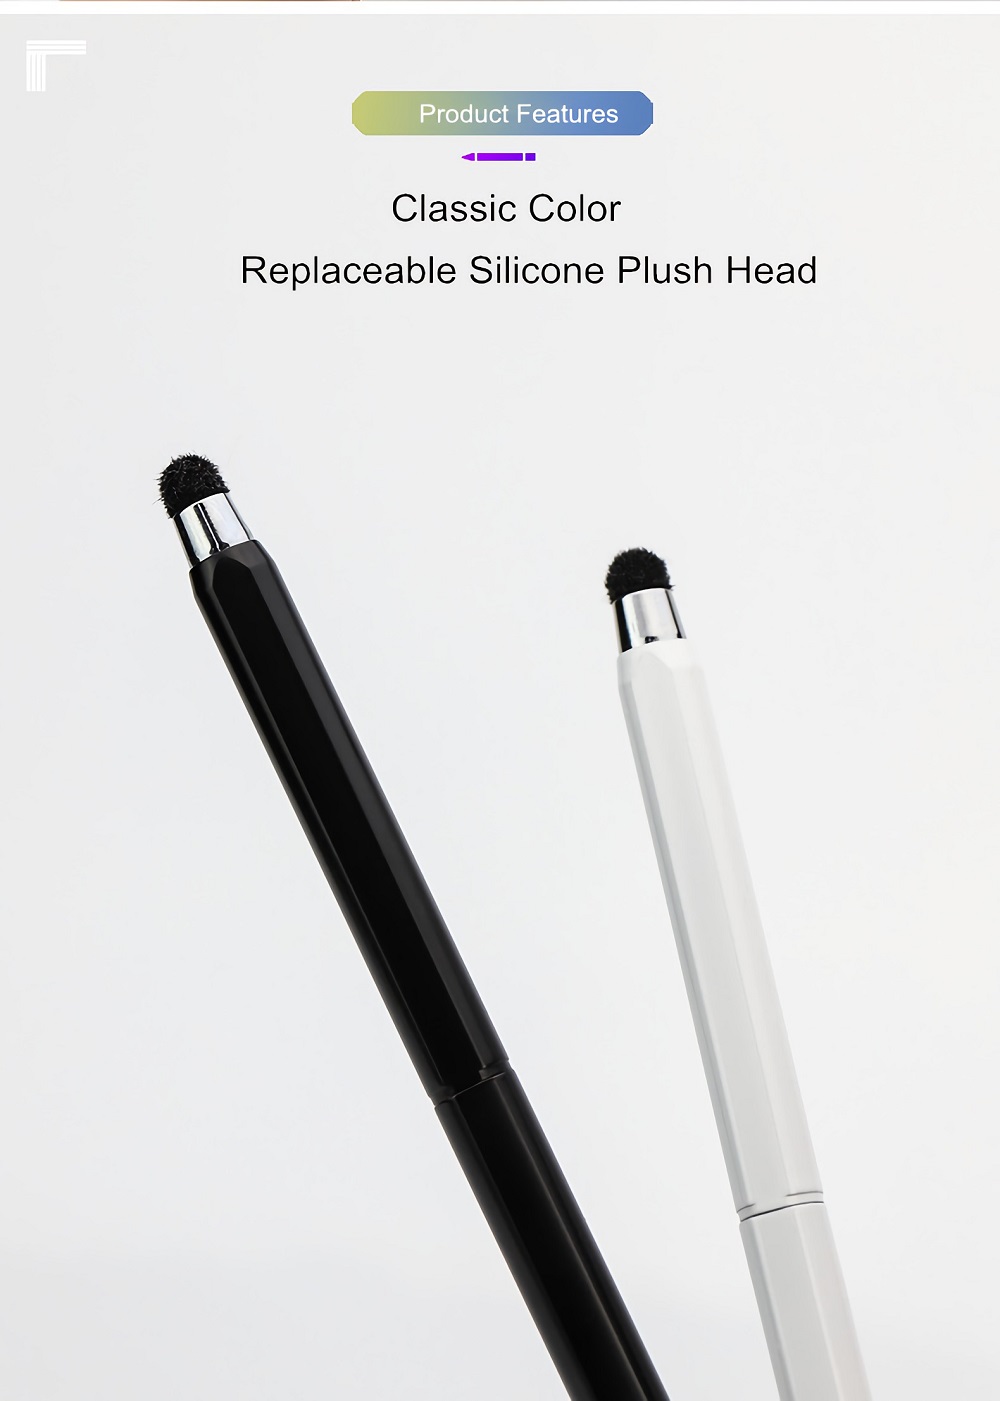 Wenku-WK-1020B-Integrated-Rotary-Capacitor-Stylus-Pen-for-IOS-Android-Tablet-Smartphone-1683831-4